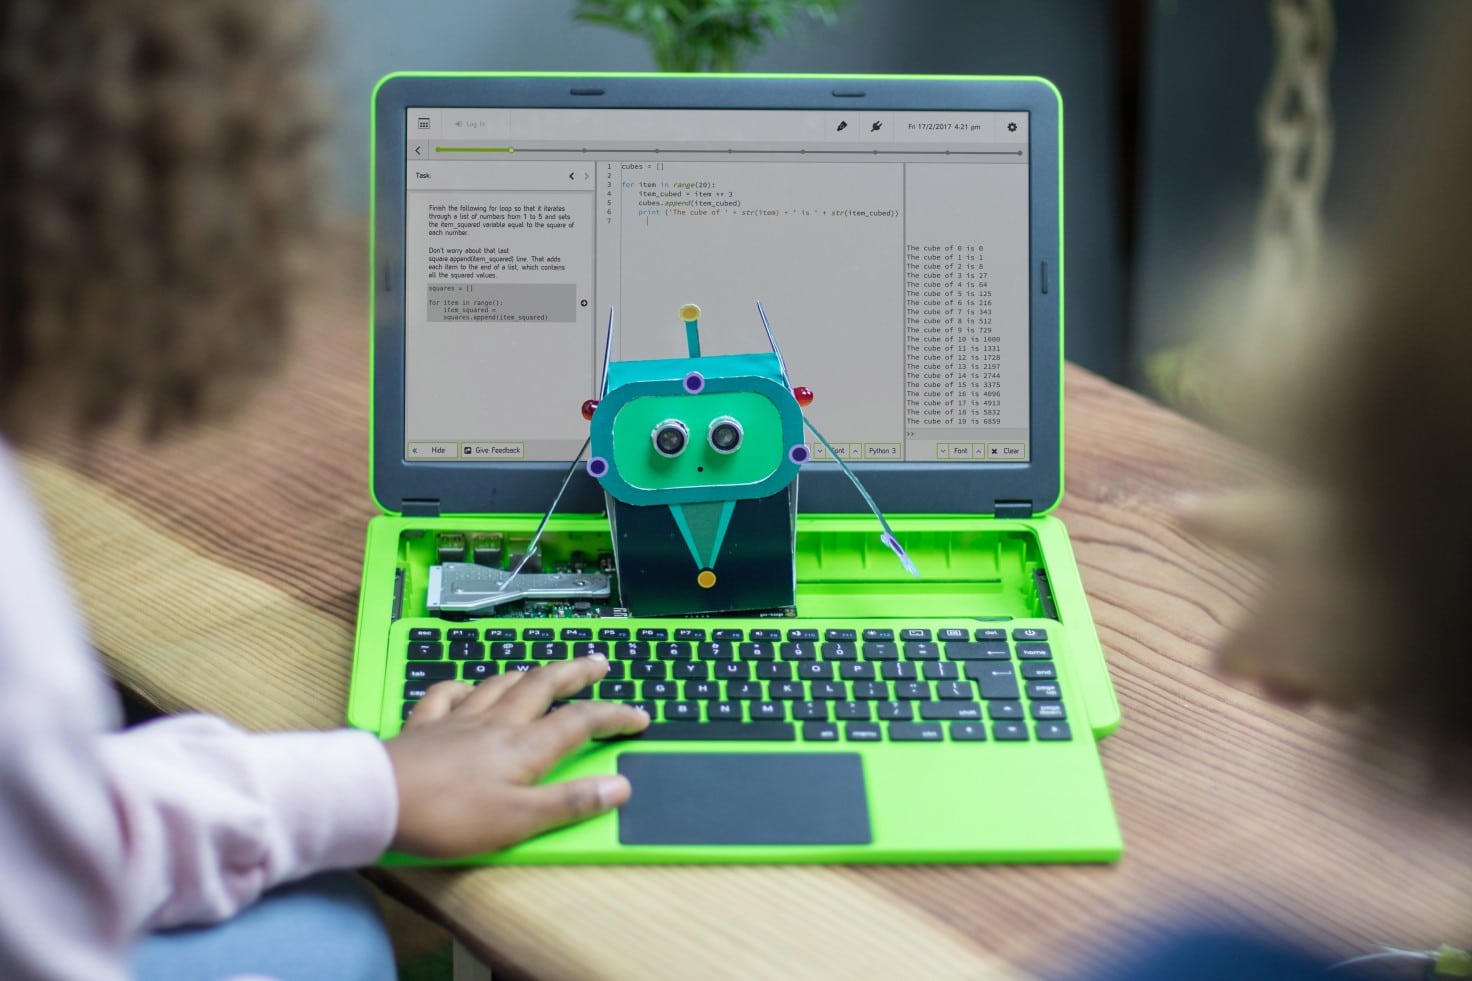 Raspberry Pi-powered Inventor’s Laptop Lets You Start With Amazing DIY Projects